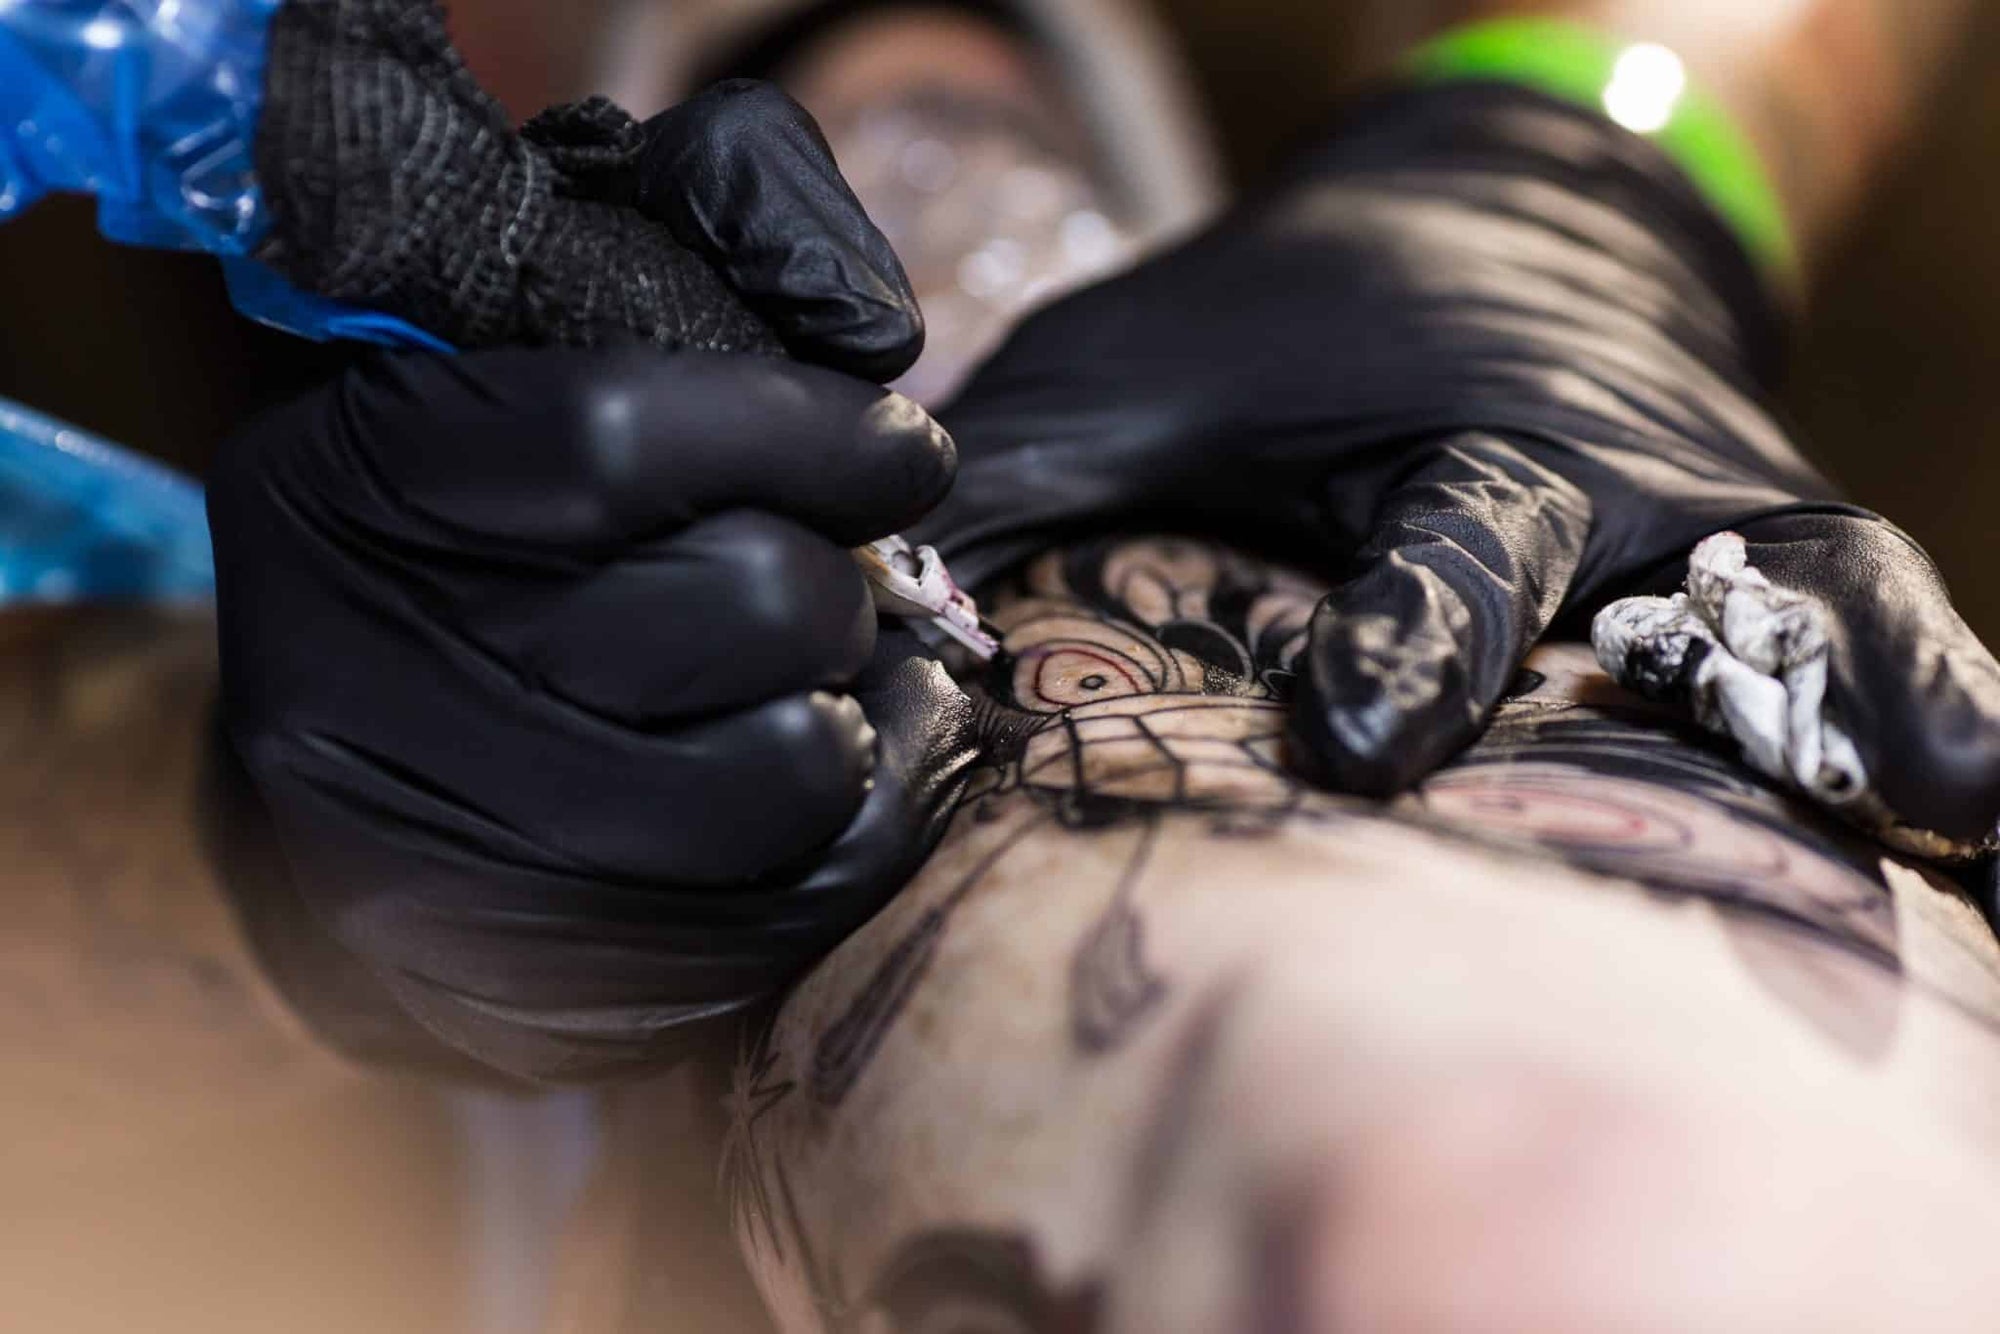 What You Should Know About Foot Tattoos